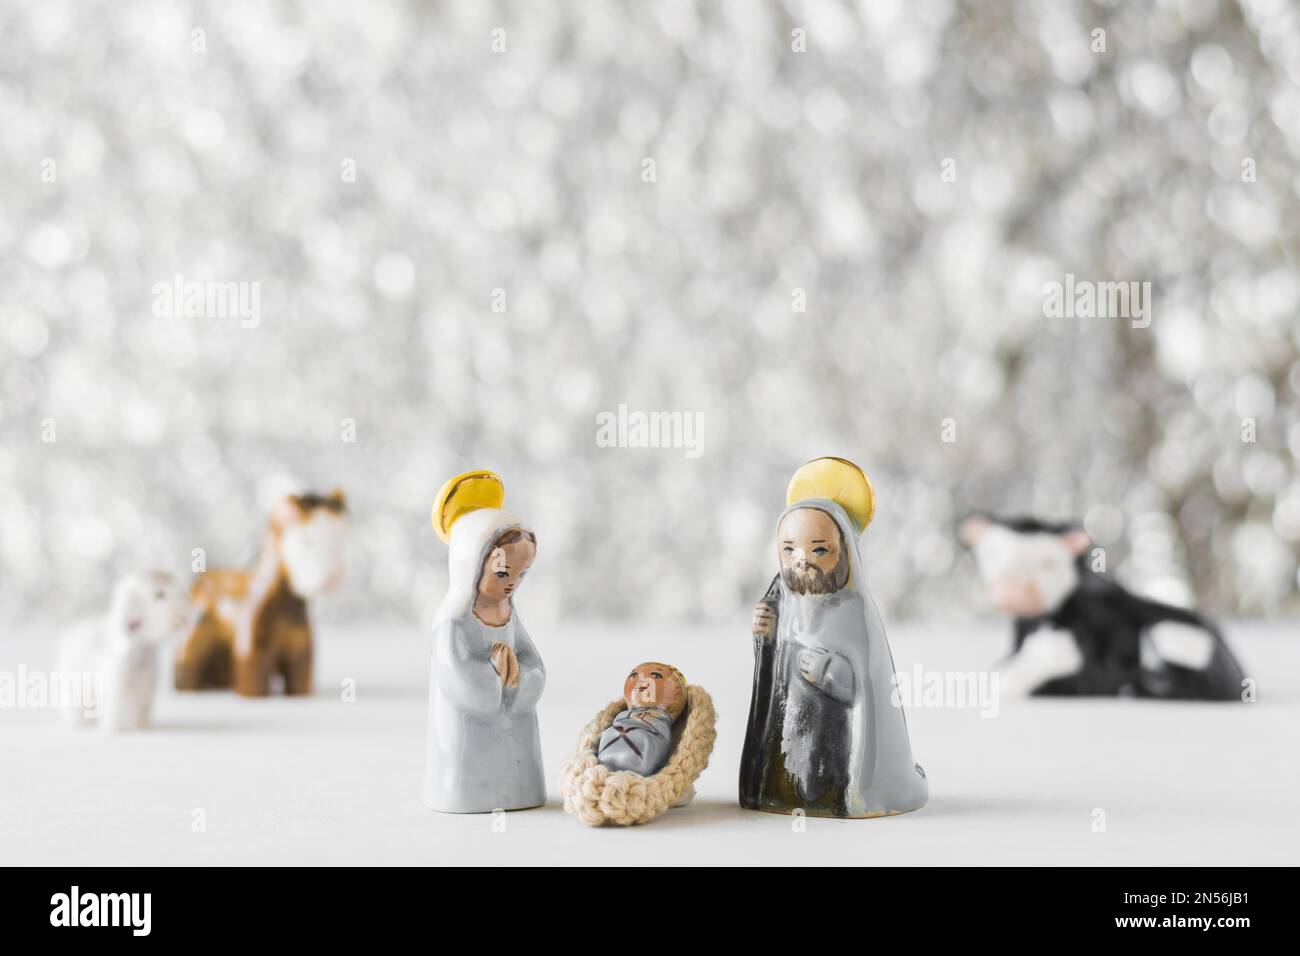 virgin mary with baby jesus saint joseph blurred background. Resolution and high quality beautiful photo Stock Photo